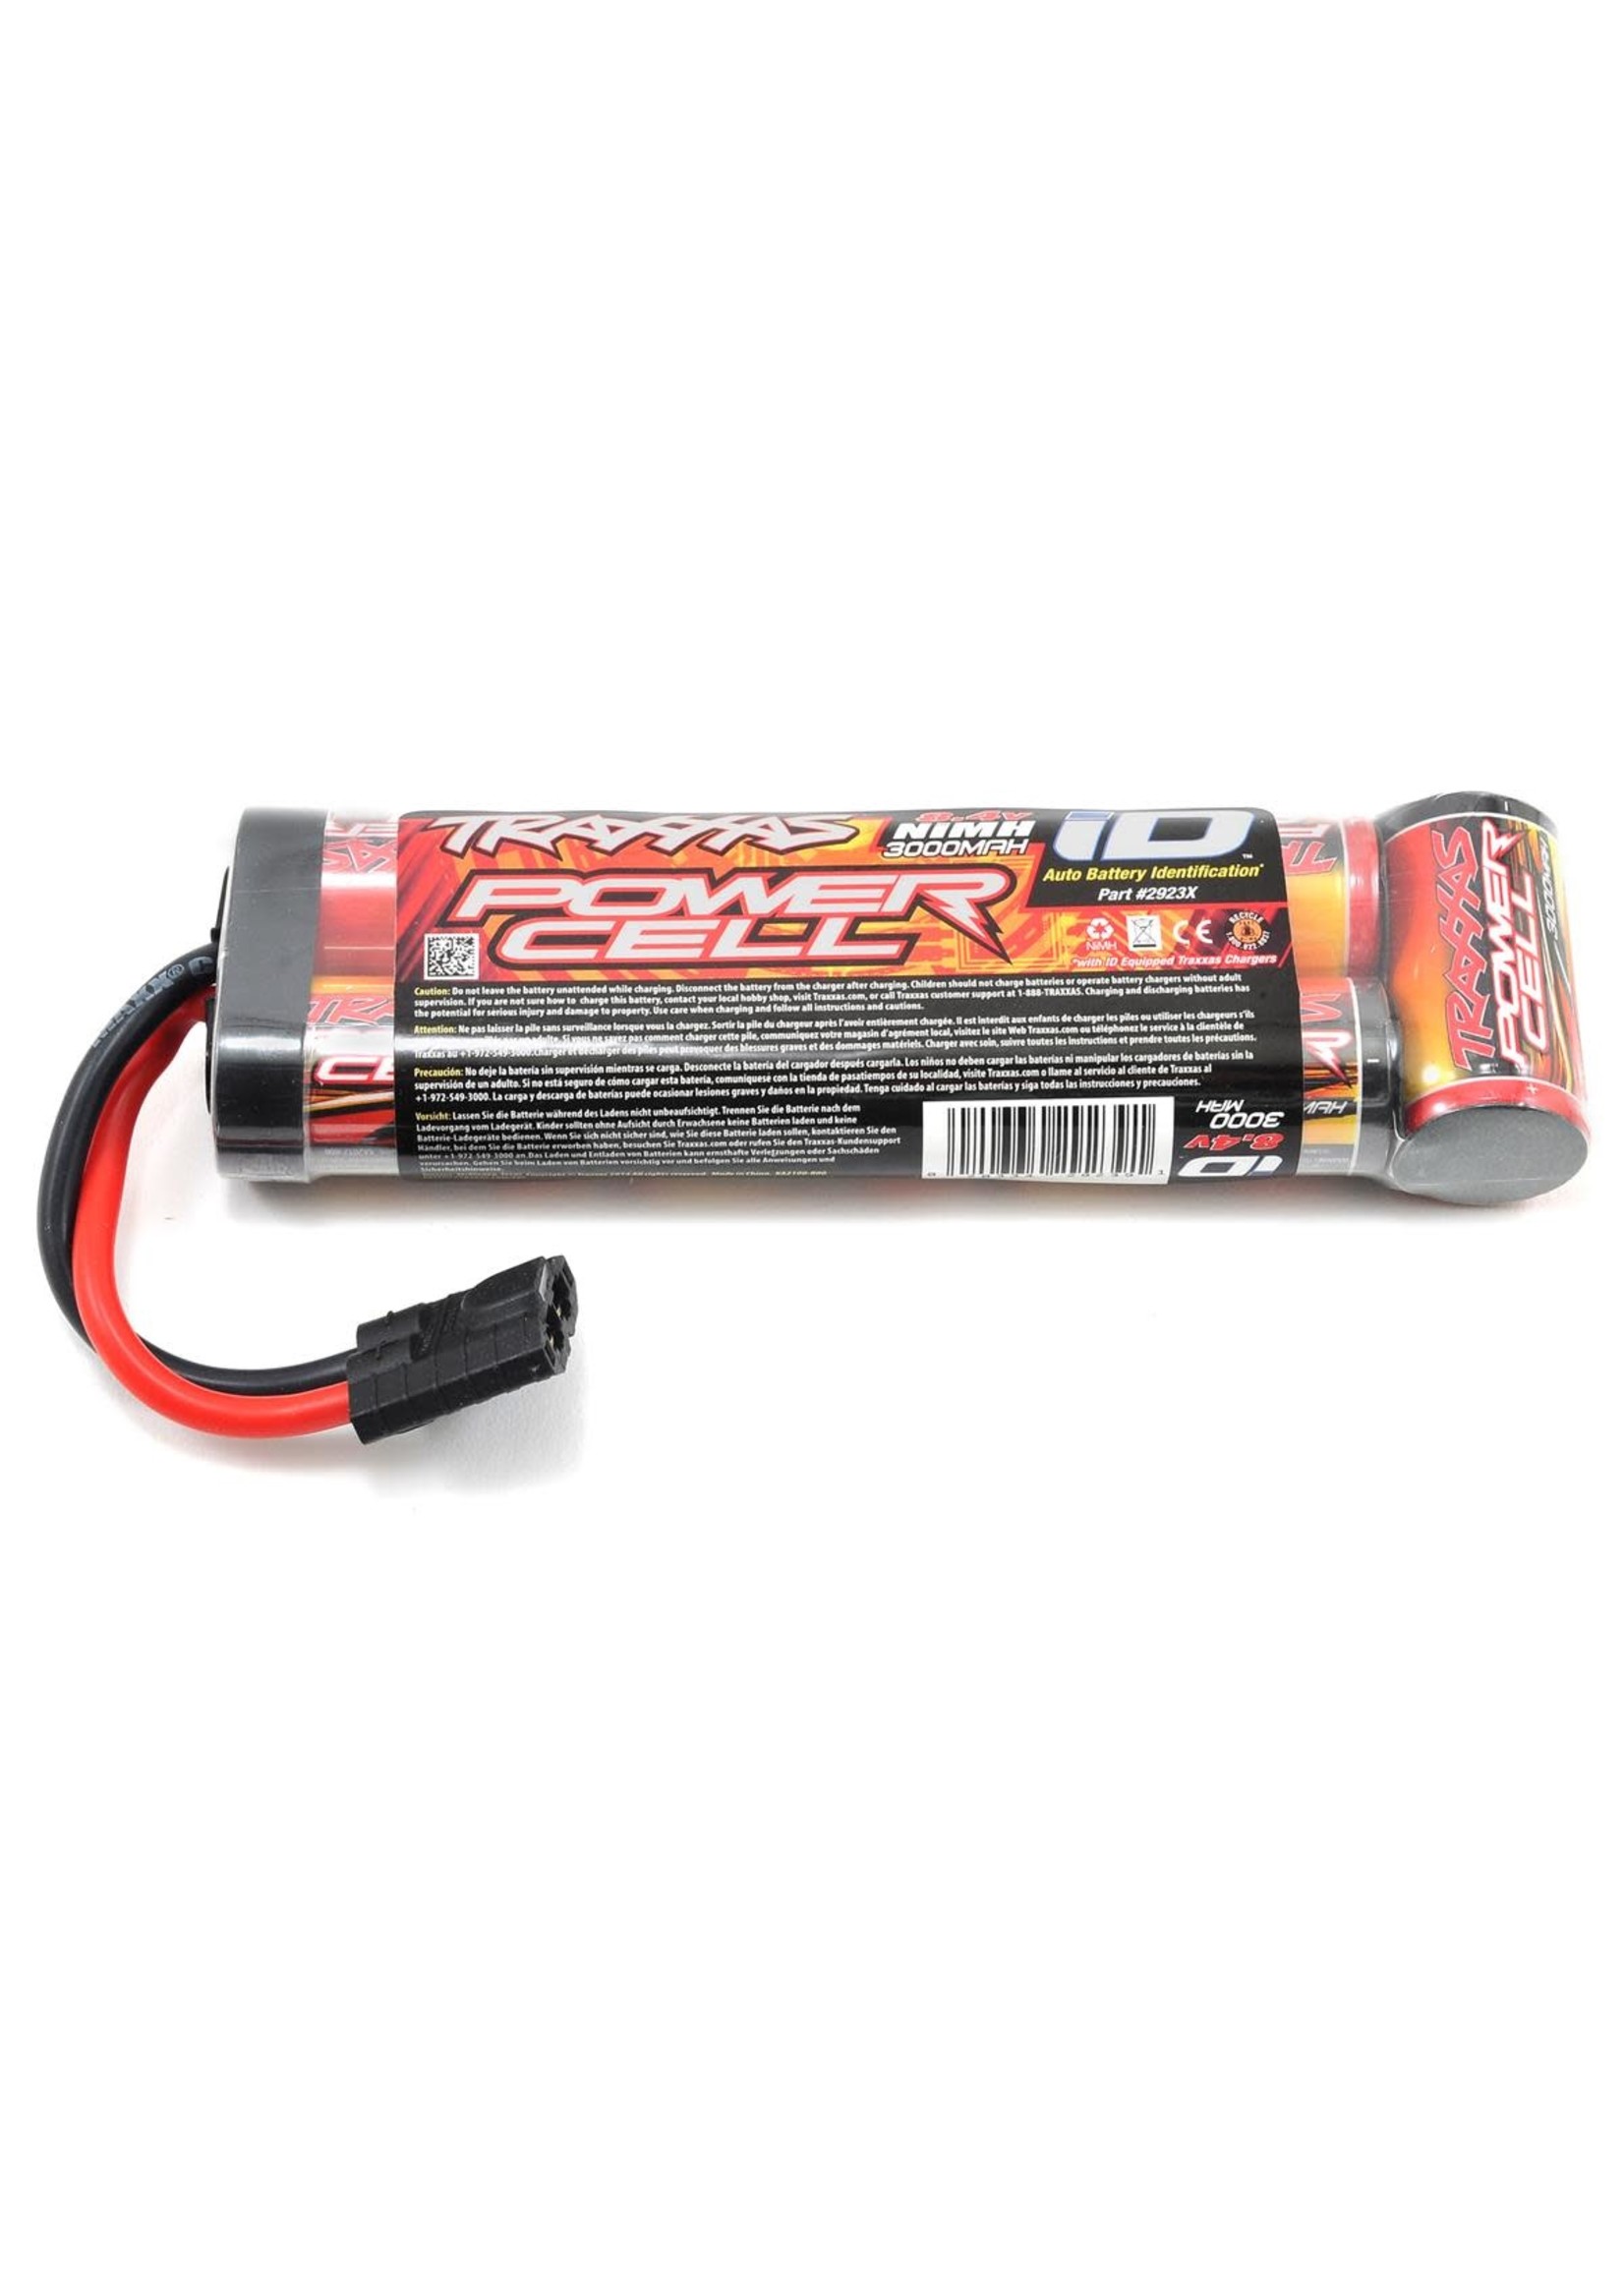 Traxxas 2983 Traxxas Battery and Charger Completer Pack